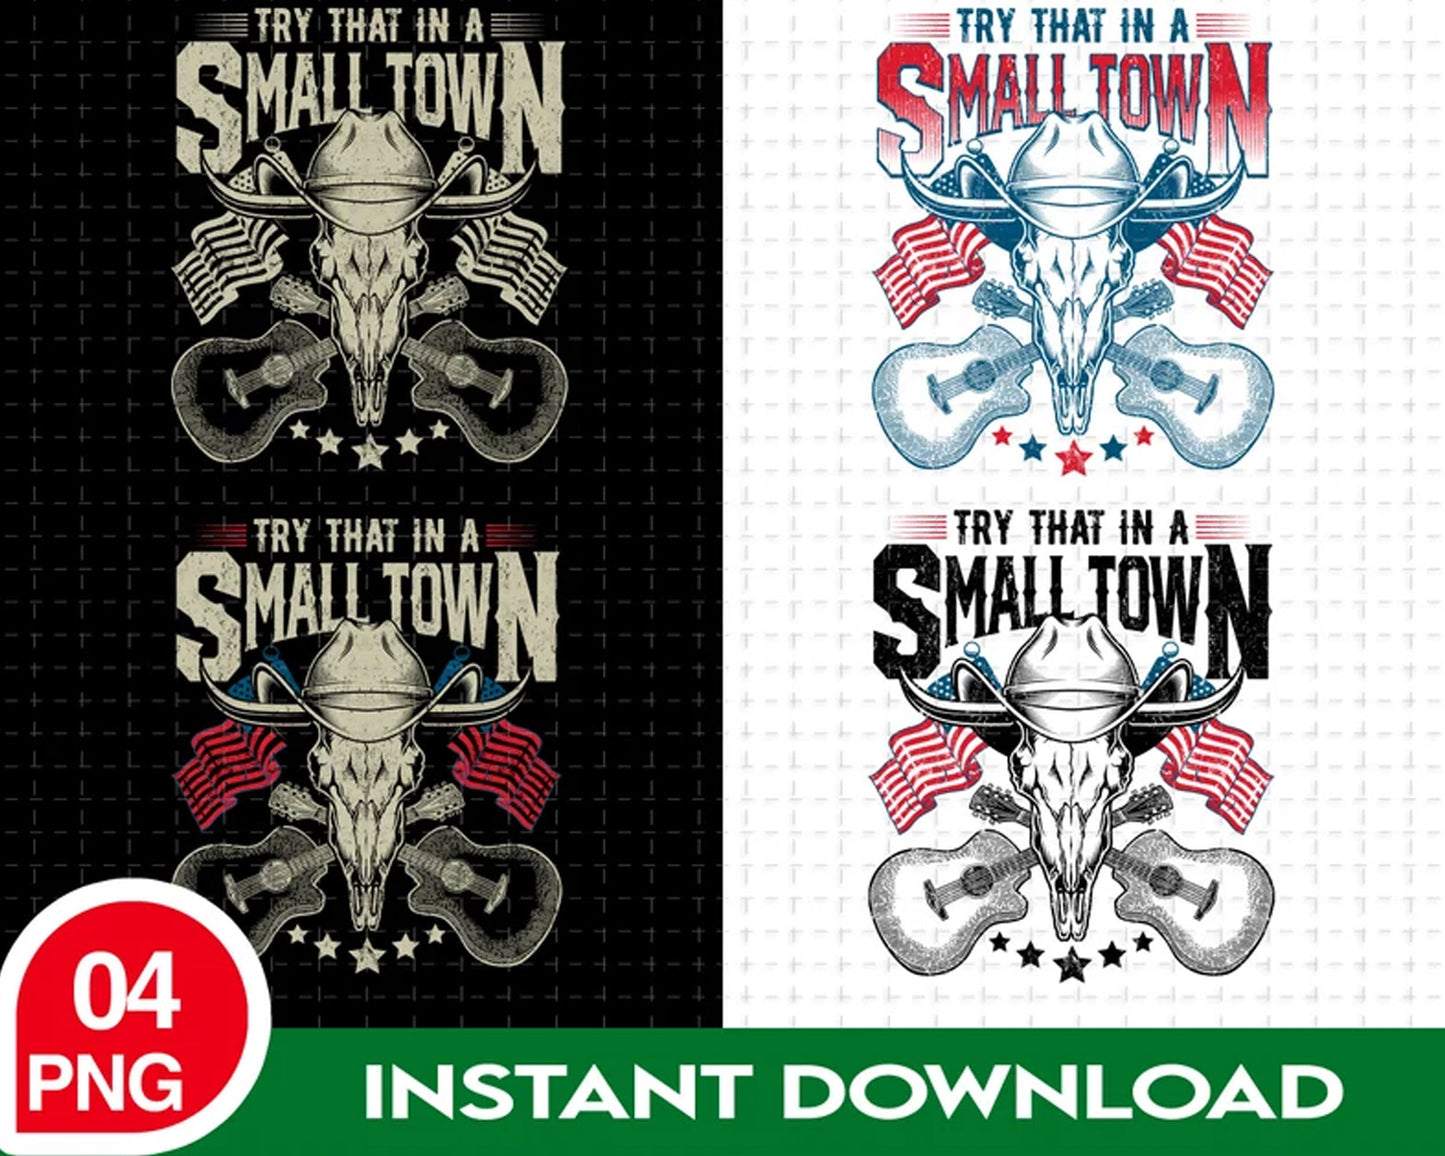 4Try That In A Small Town Bundle PNG Files For Sublimation, American Flag Png, Jason Aldean PNG, Country Music PNG.